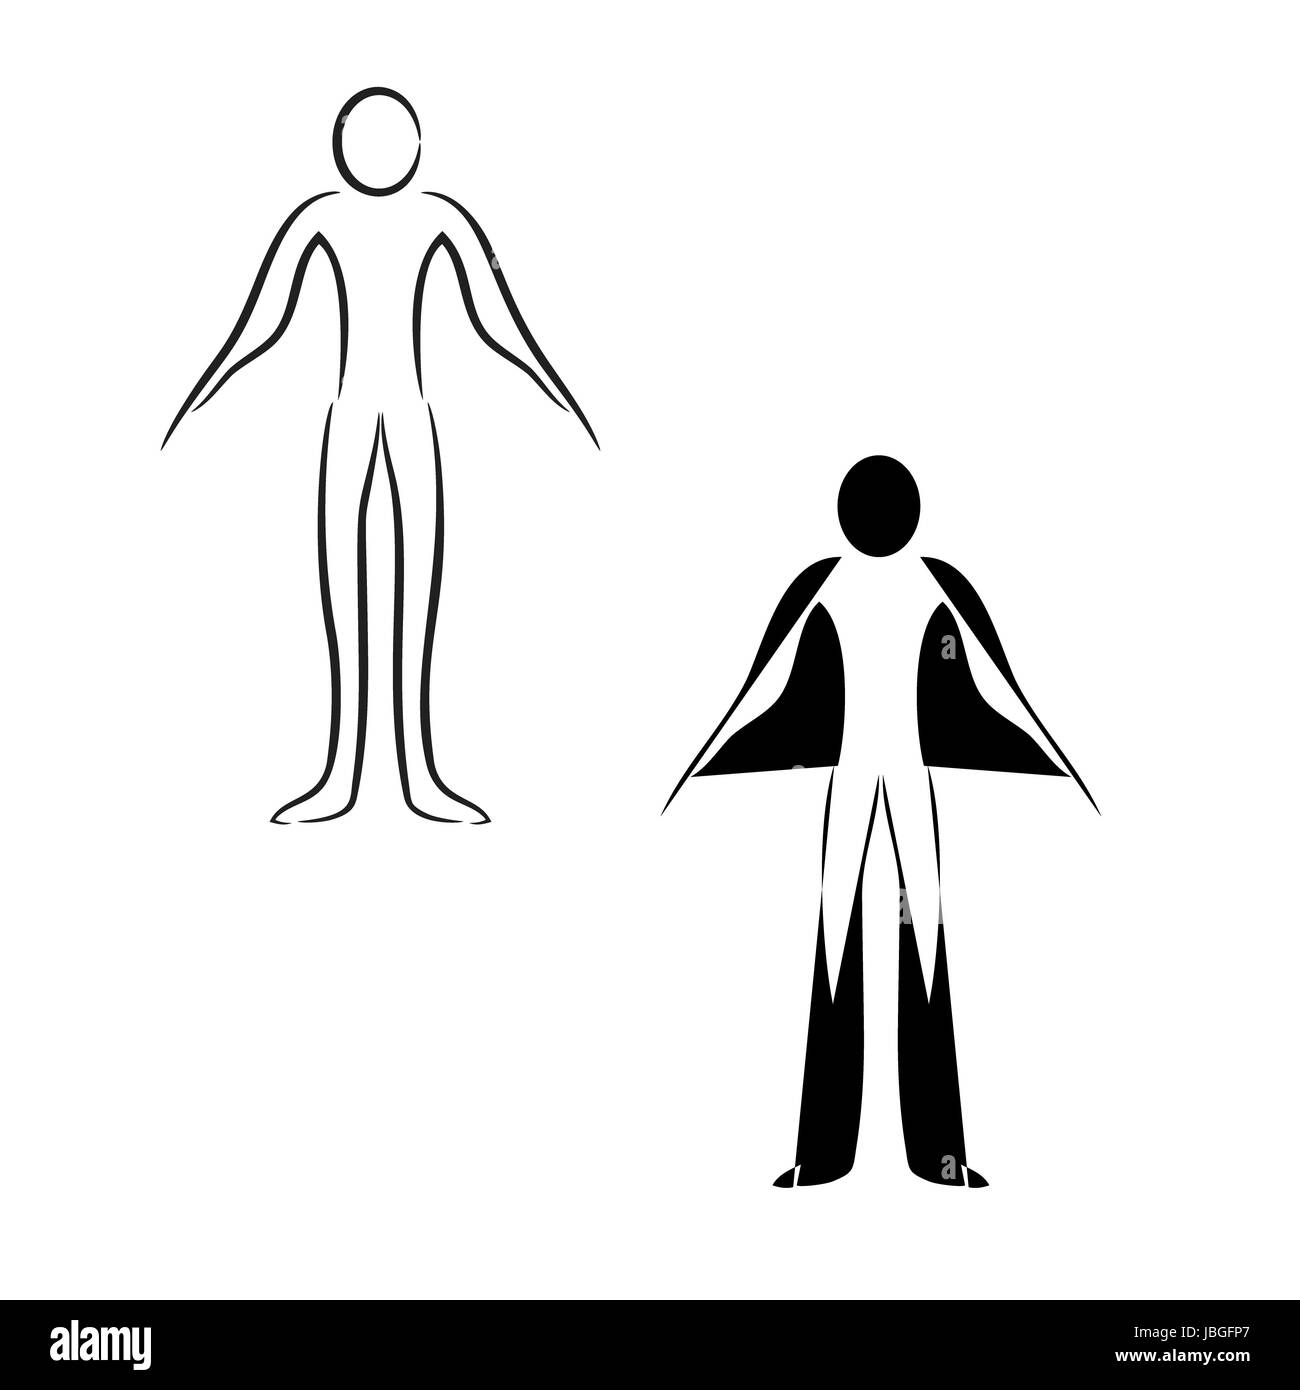 Vector sketch of two sides of man, ordinary and superhero. Stock Photo